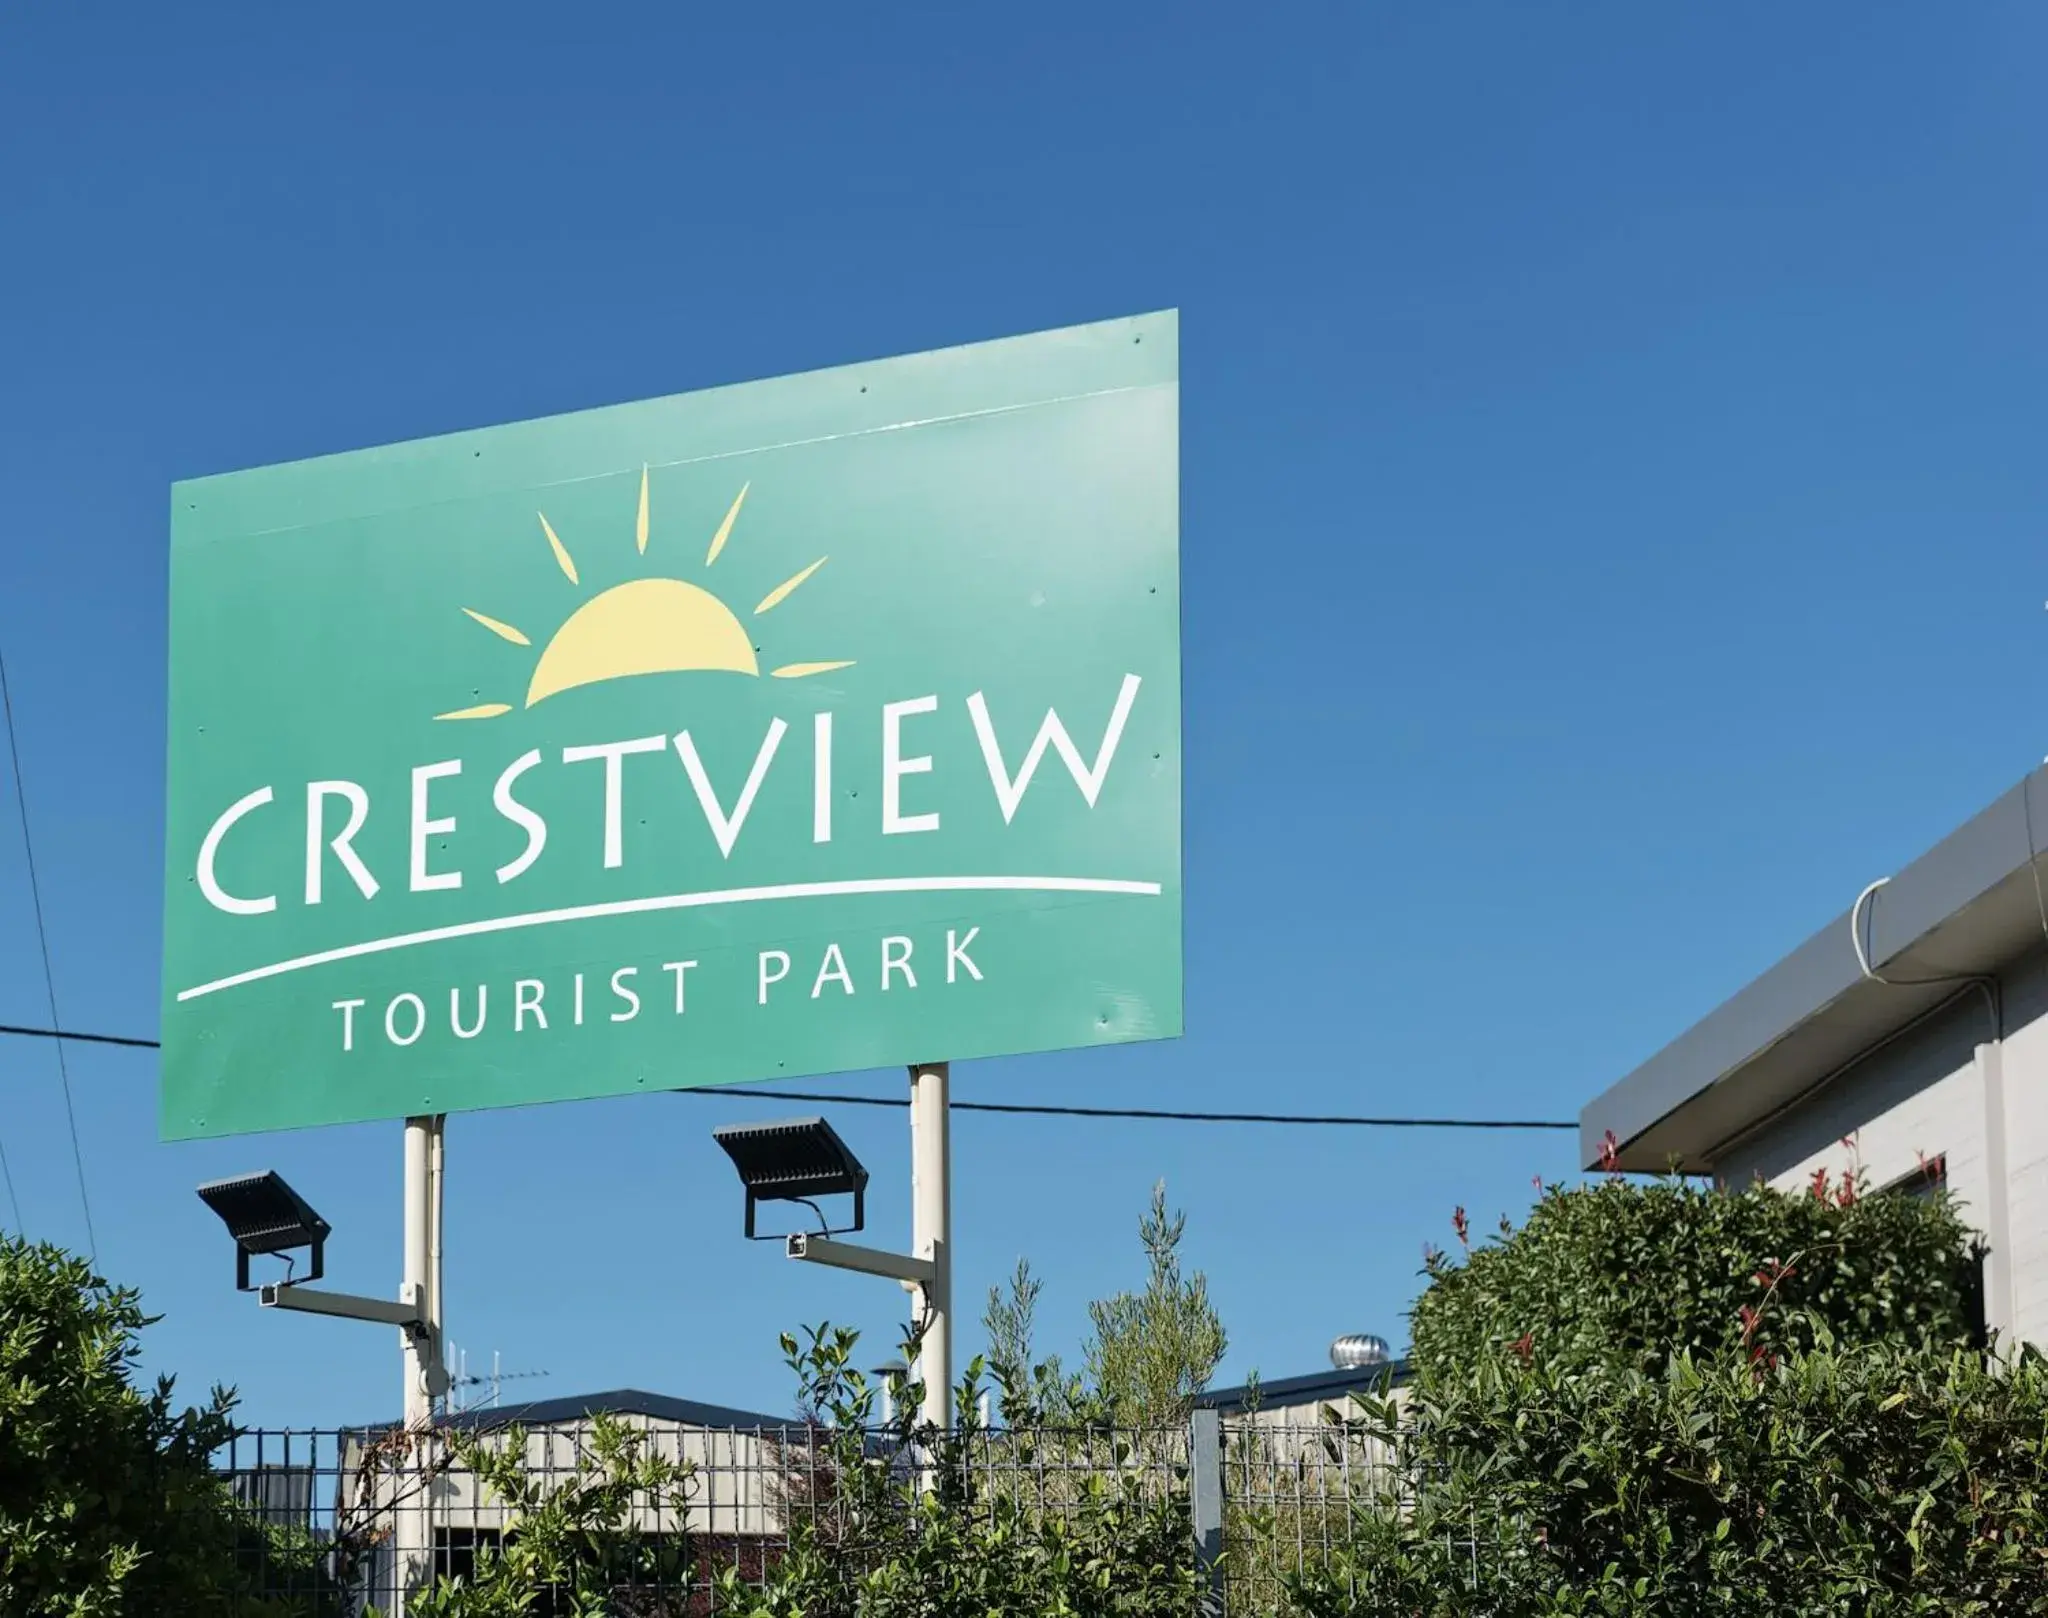 Property logo or sign in Crestview Tourist Park